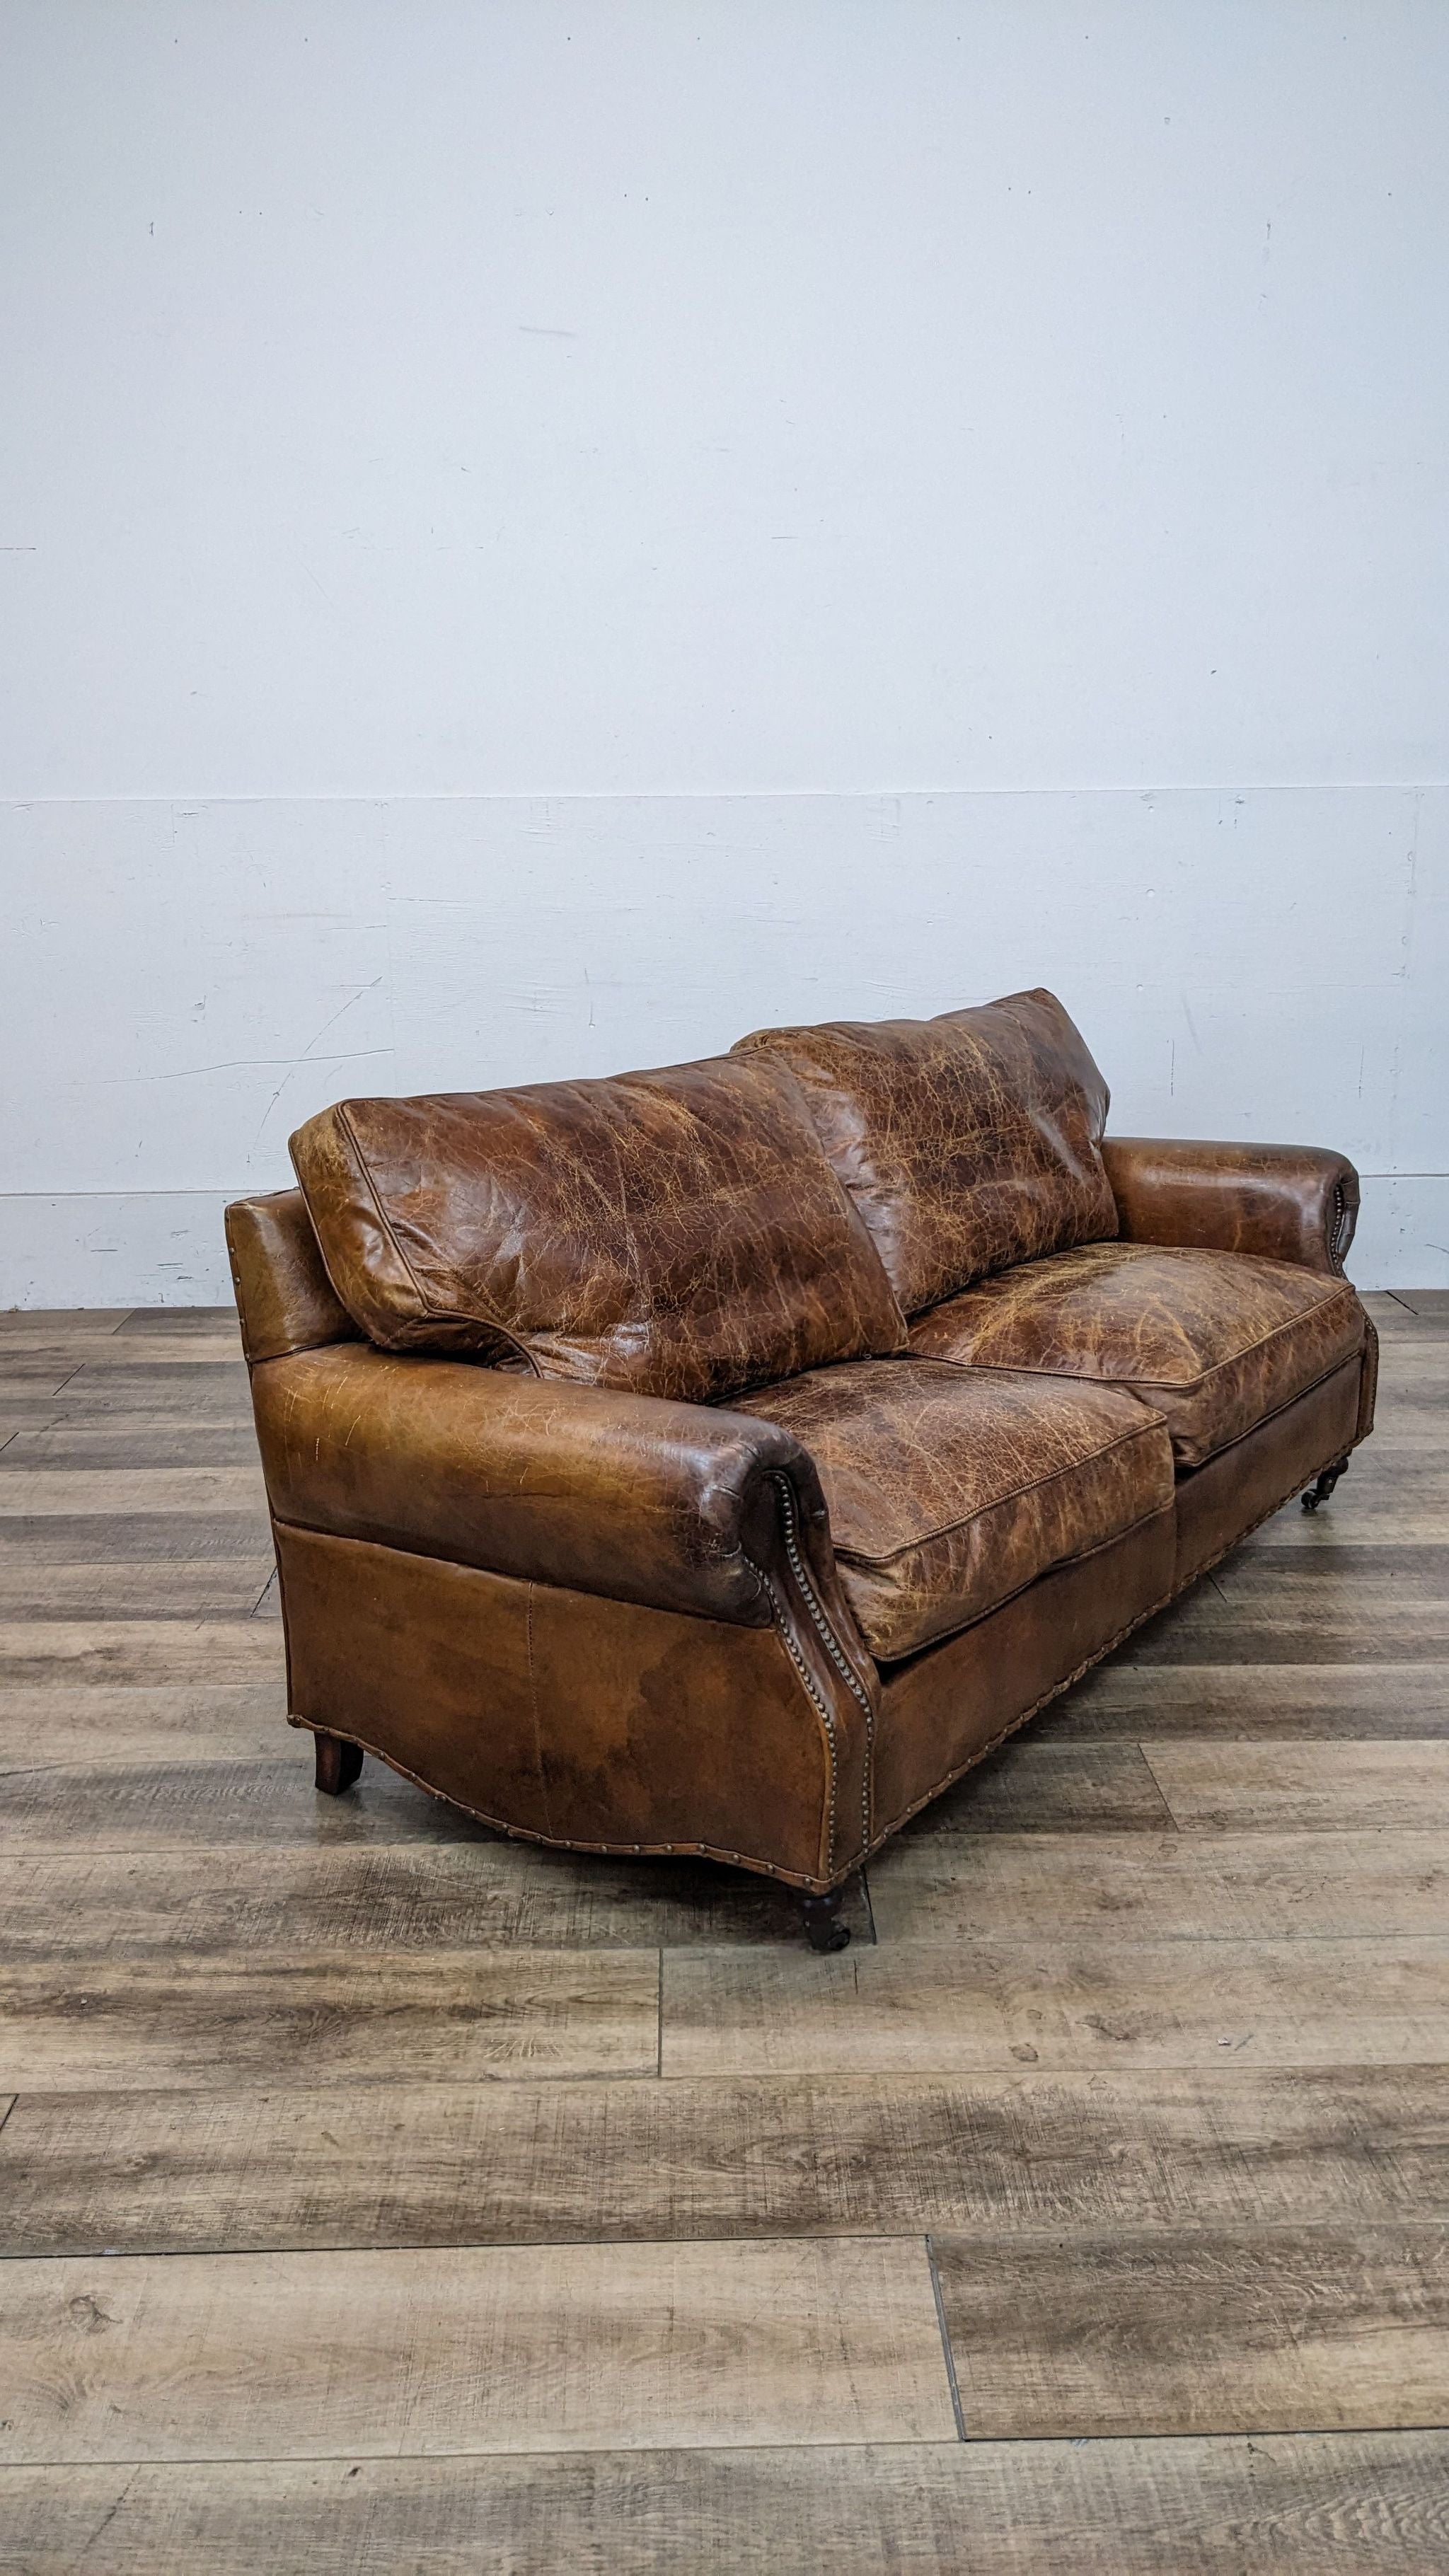 Frontal view of a Reperch contemporary cognac leather sofa, showing a worn patina and classic design.